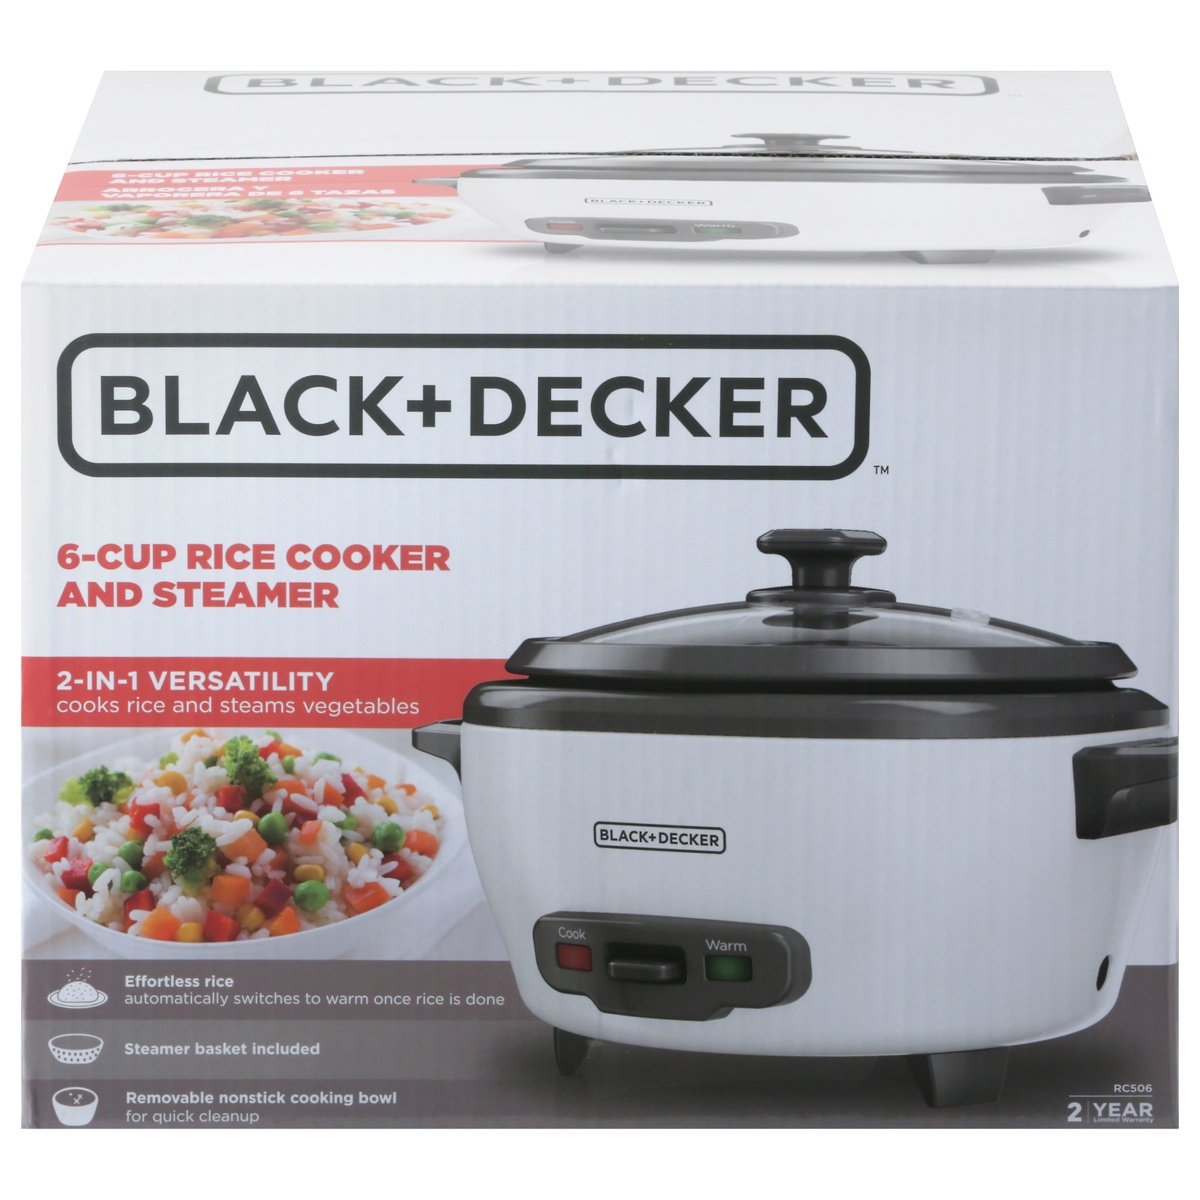 BLACK+DECKER 6 Cup Rice Cooker - White RC506 1 ct